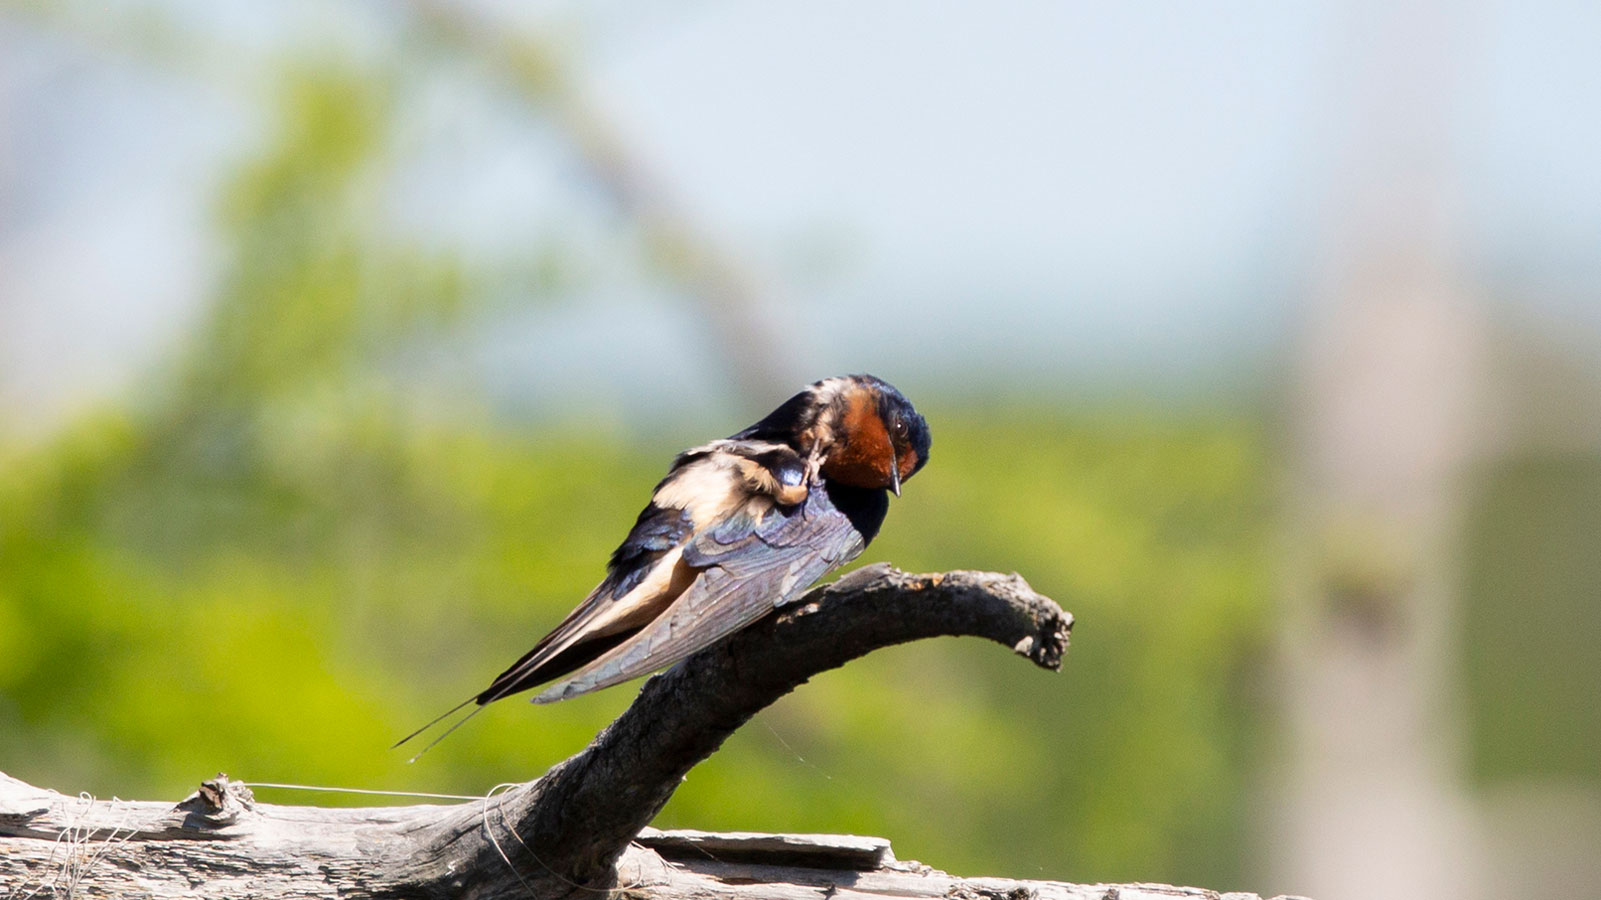 Barn swallow grooming on a tree branch